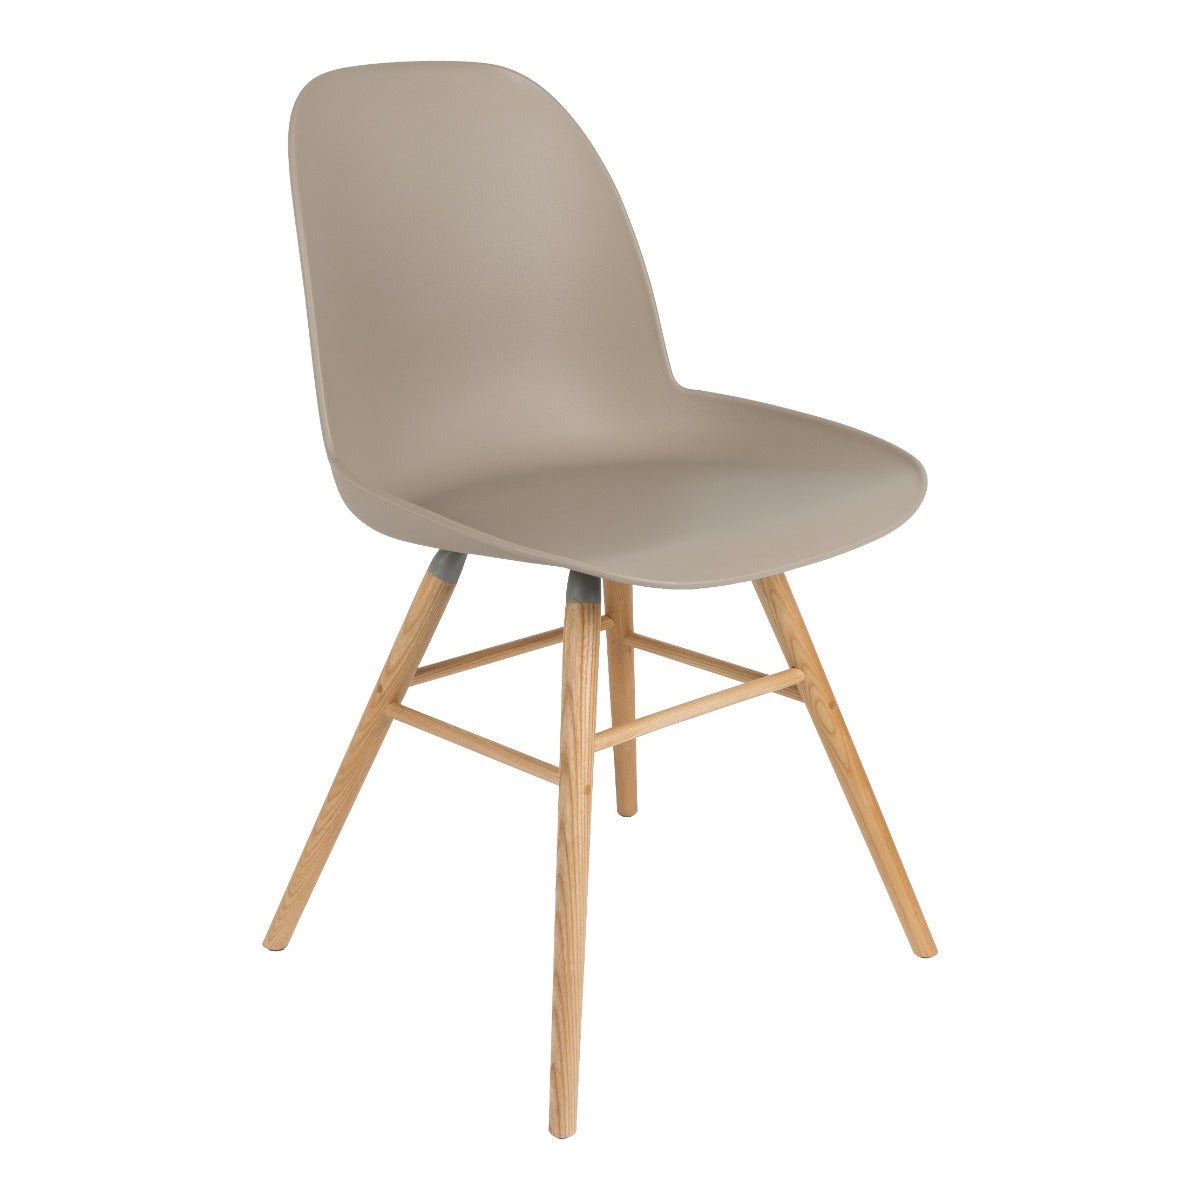 The Albert Kuip chair, designed by the Amsterdam Studio APE, is an amazing combination of modern and retro style. The streamlined seat is supported by wooden, minimalist ash wood legs. The whole project has an extremely universal character, which gives numerous arrangement possibilities, especially in the case of Scandinavian interiors, vintage or modern. It works perfectly as a dining room or office chair.